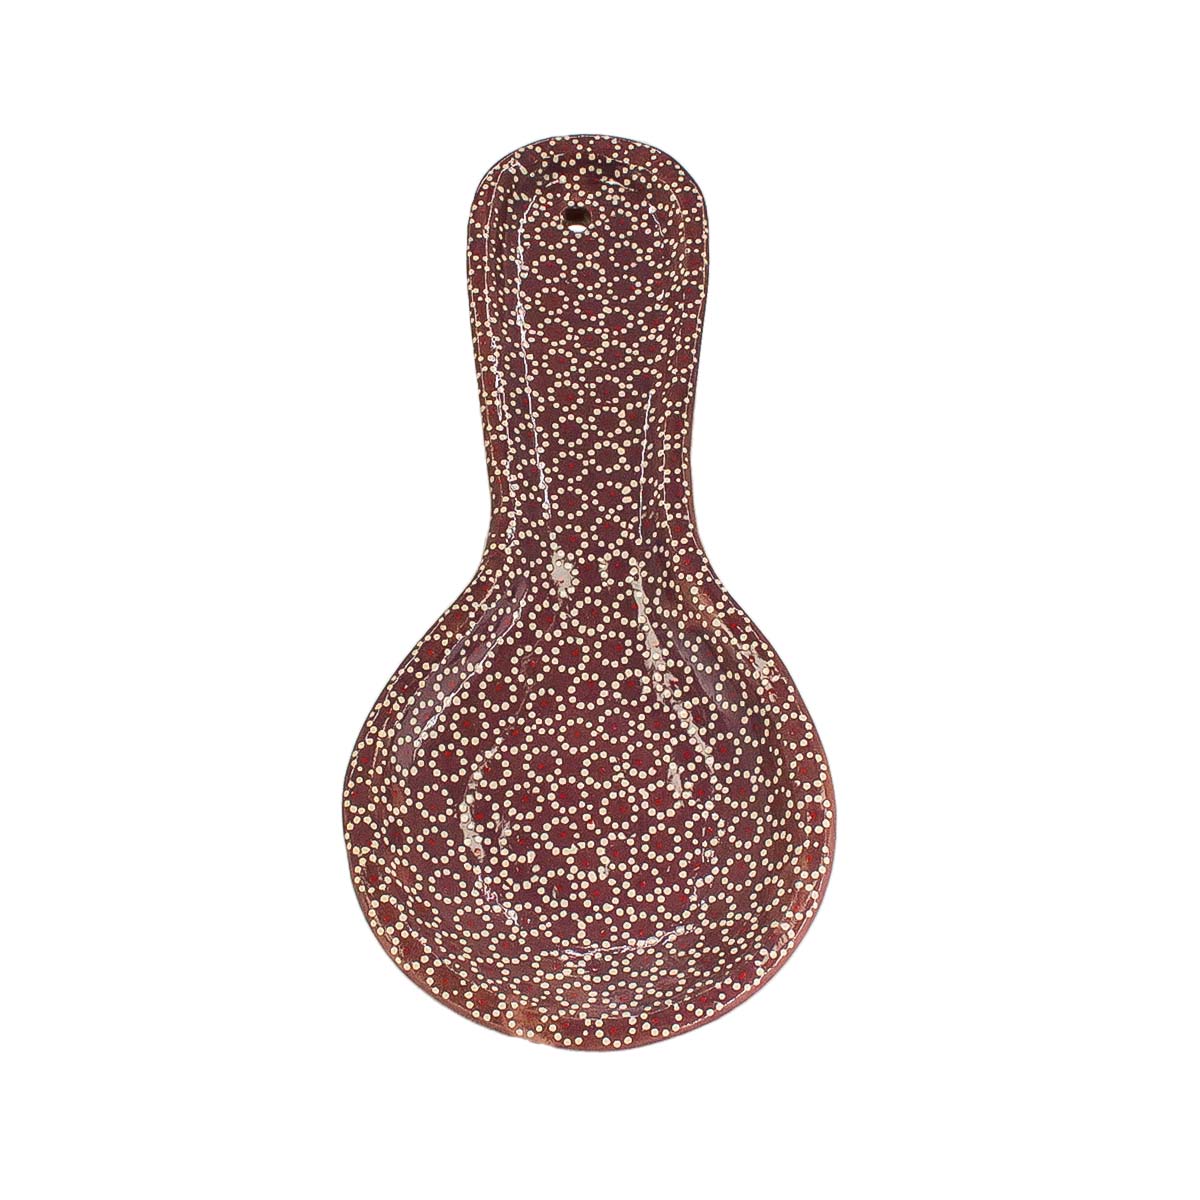 Capula Hand-Painted Spoon Rest - 2